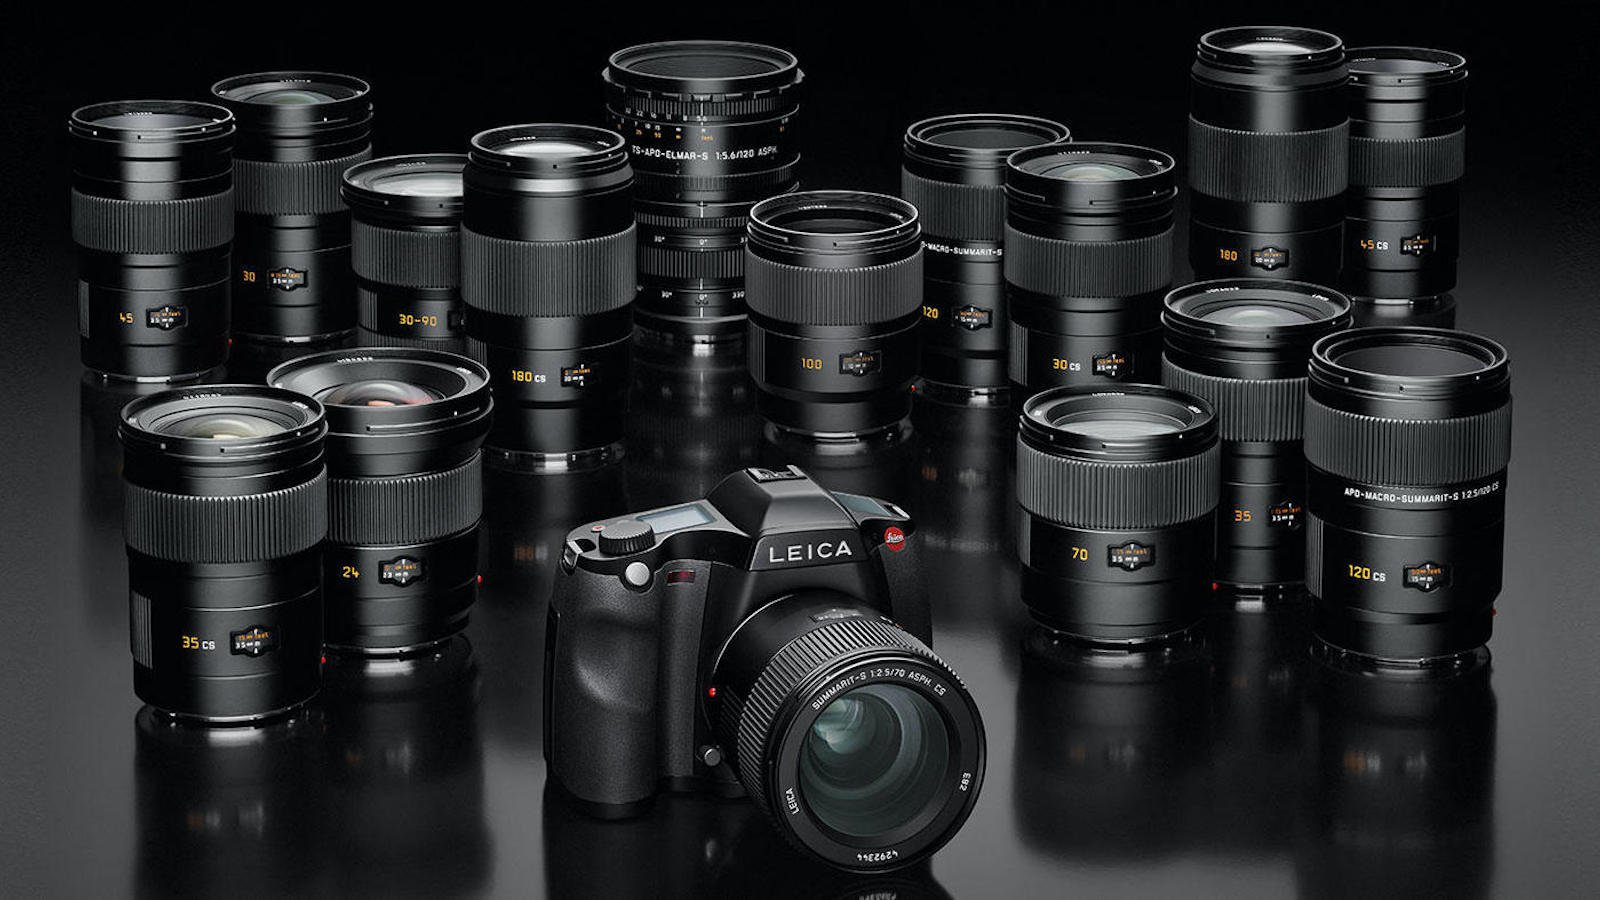 Leica S-System Digital Camera Setup suits the needs of pro photographers